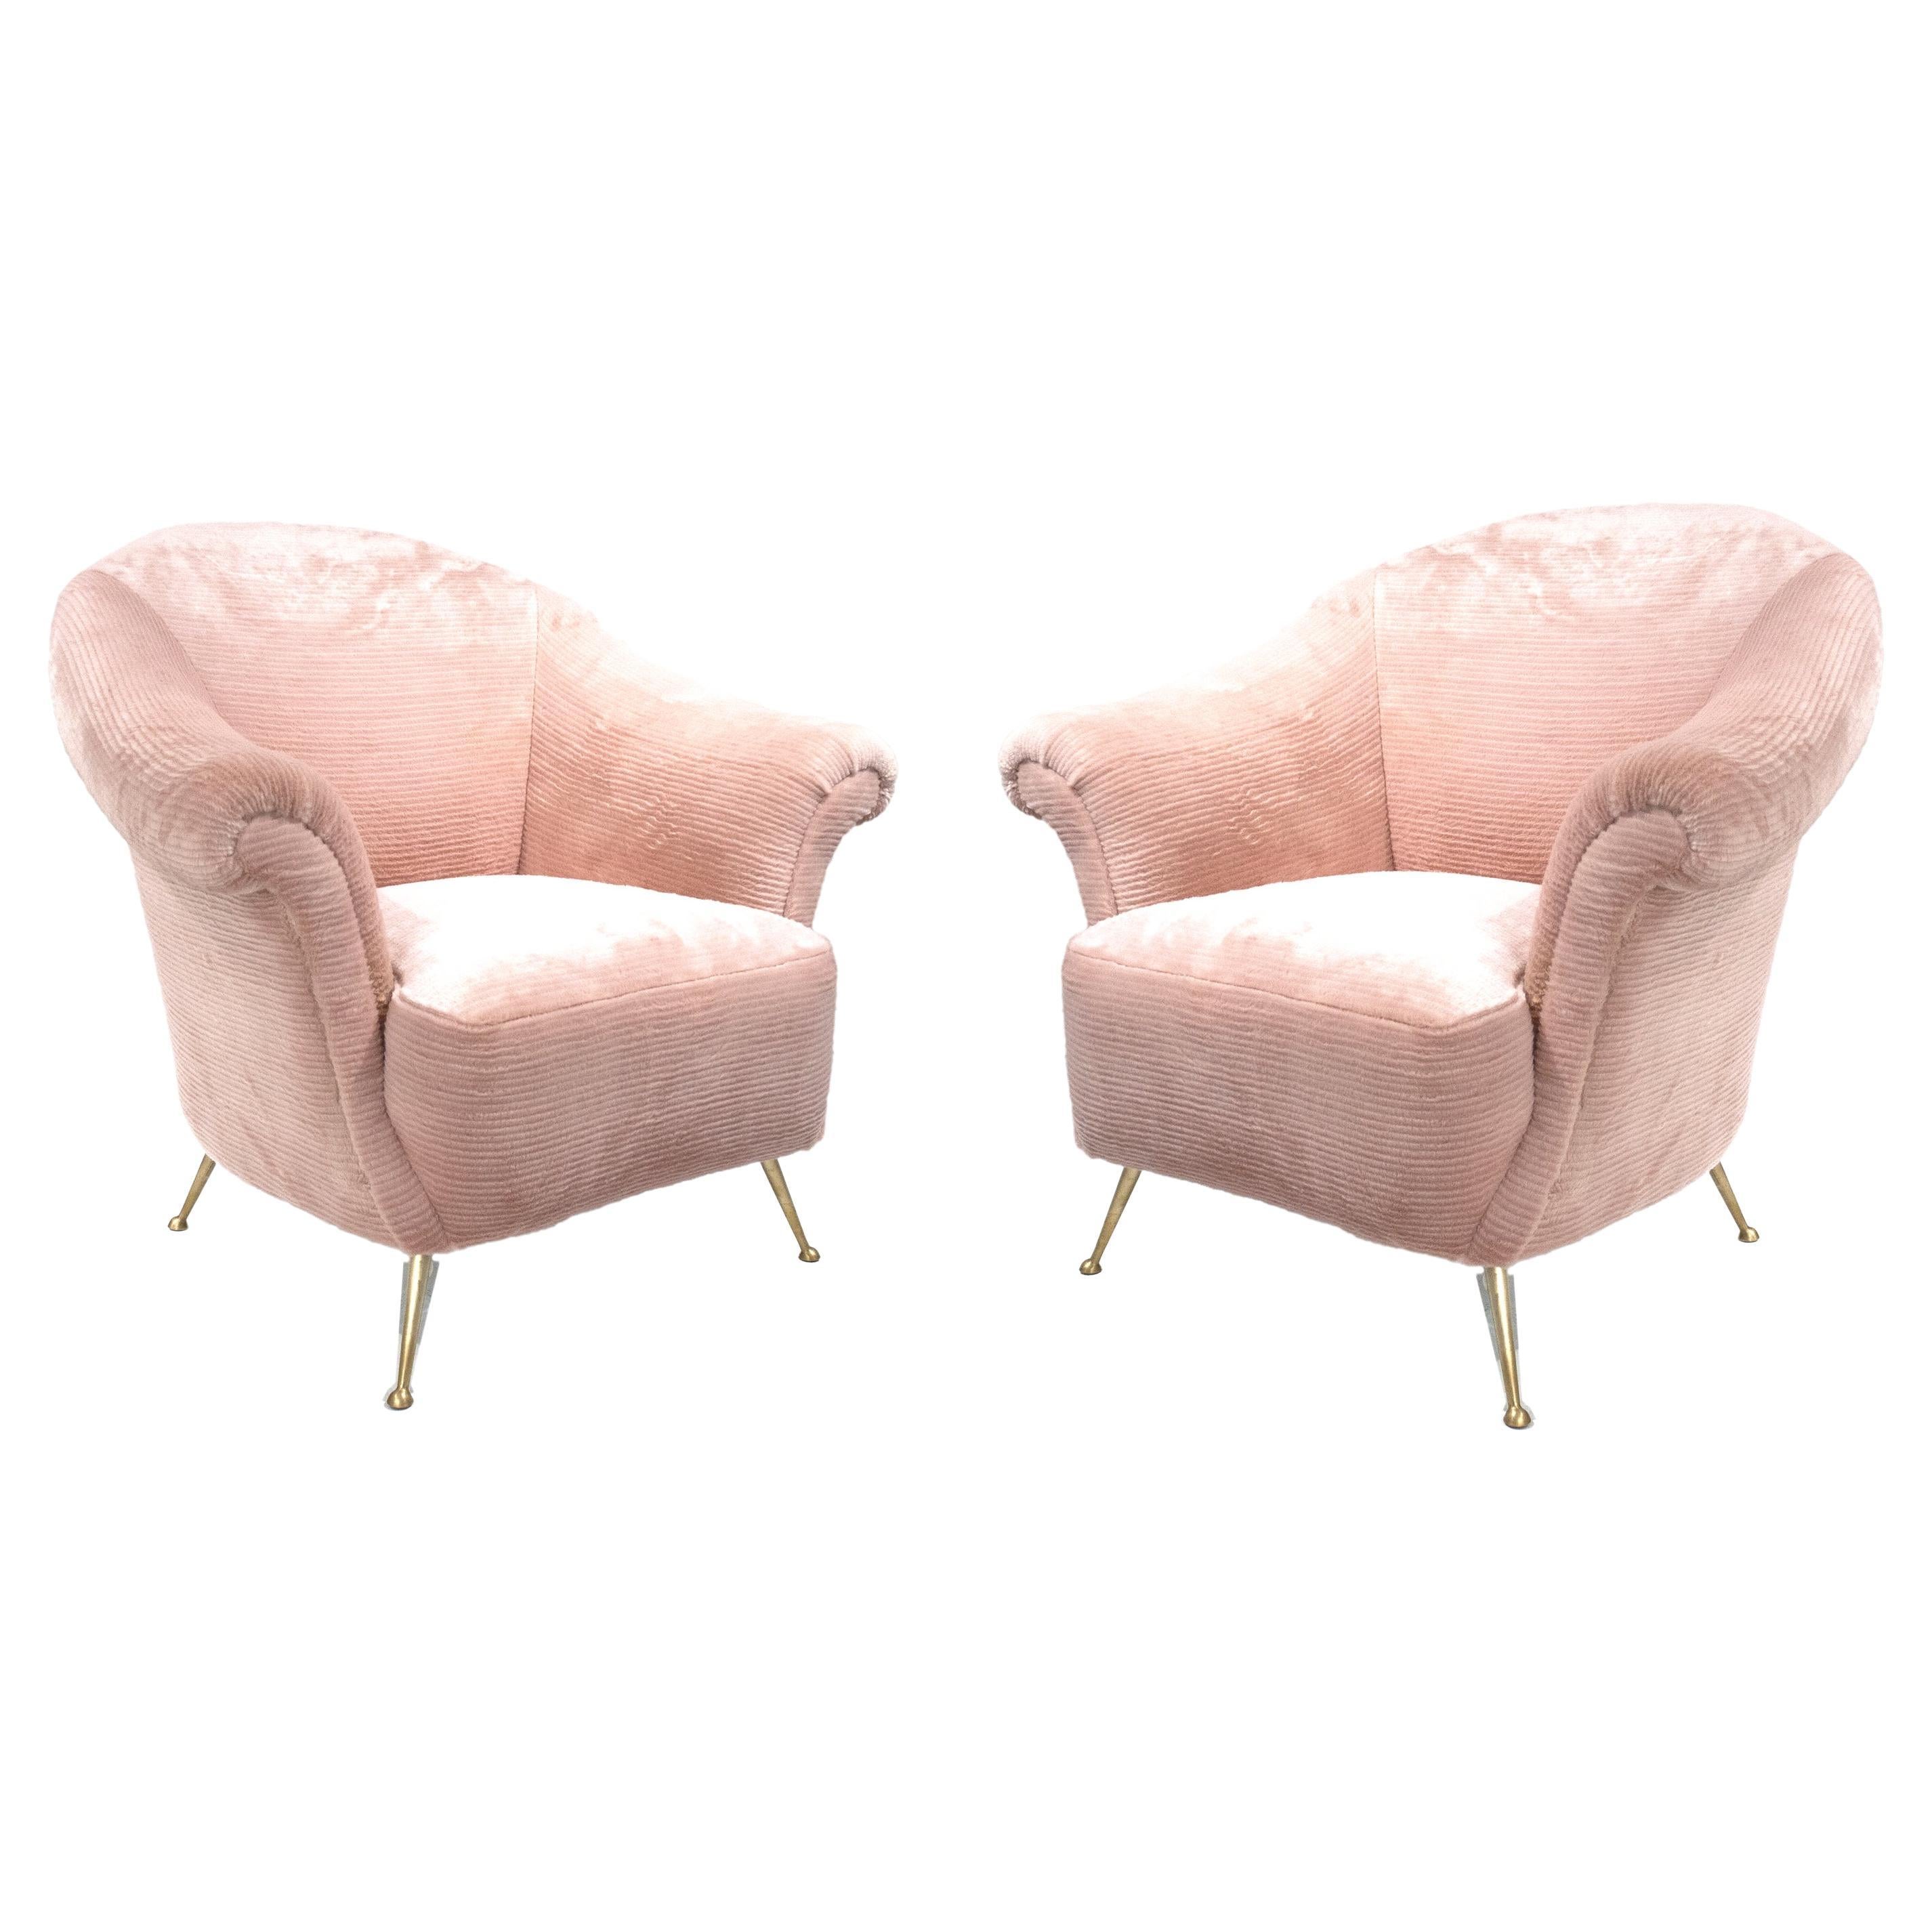 Mid-Century Modern Pair of Armchairs in Pink Trimed Faux Fur, Italy, 1950 For Sale